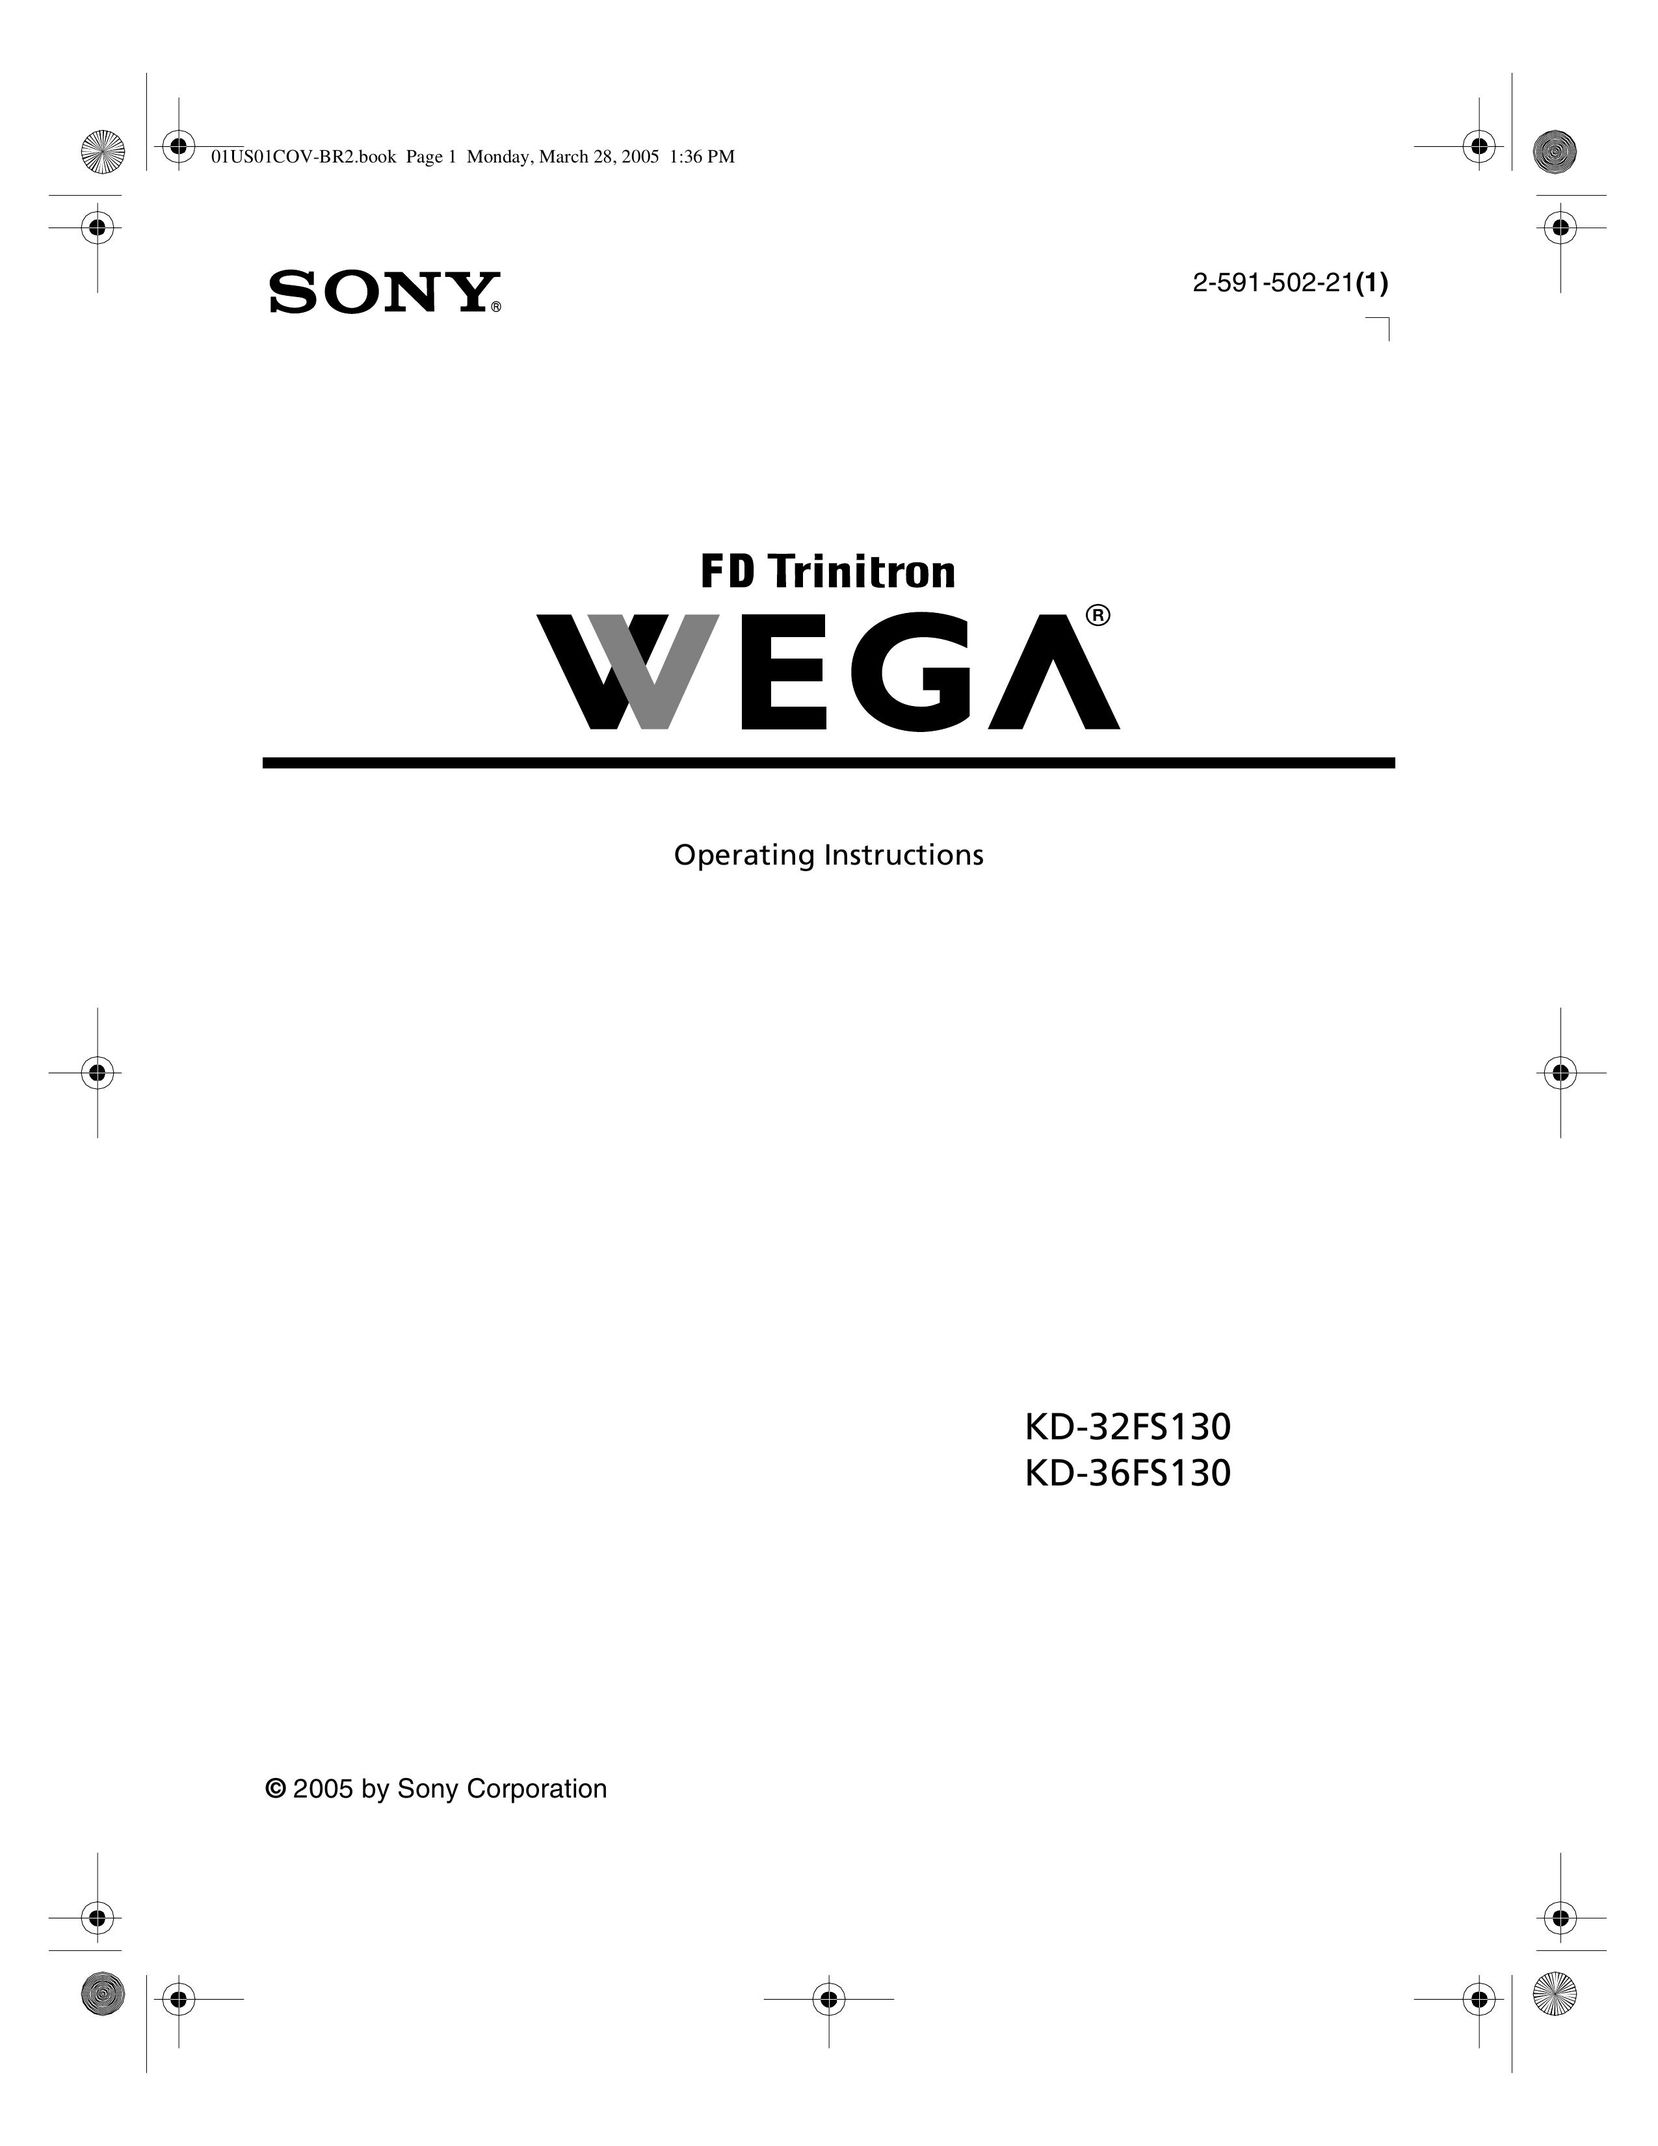 Sony KD 36FS130 CRT Television User Manual